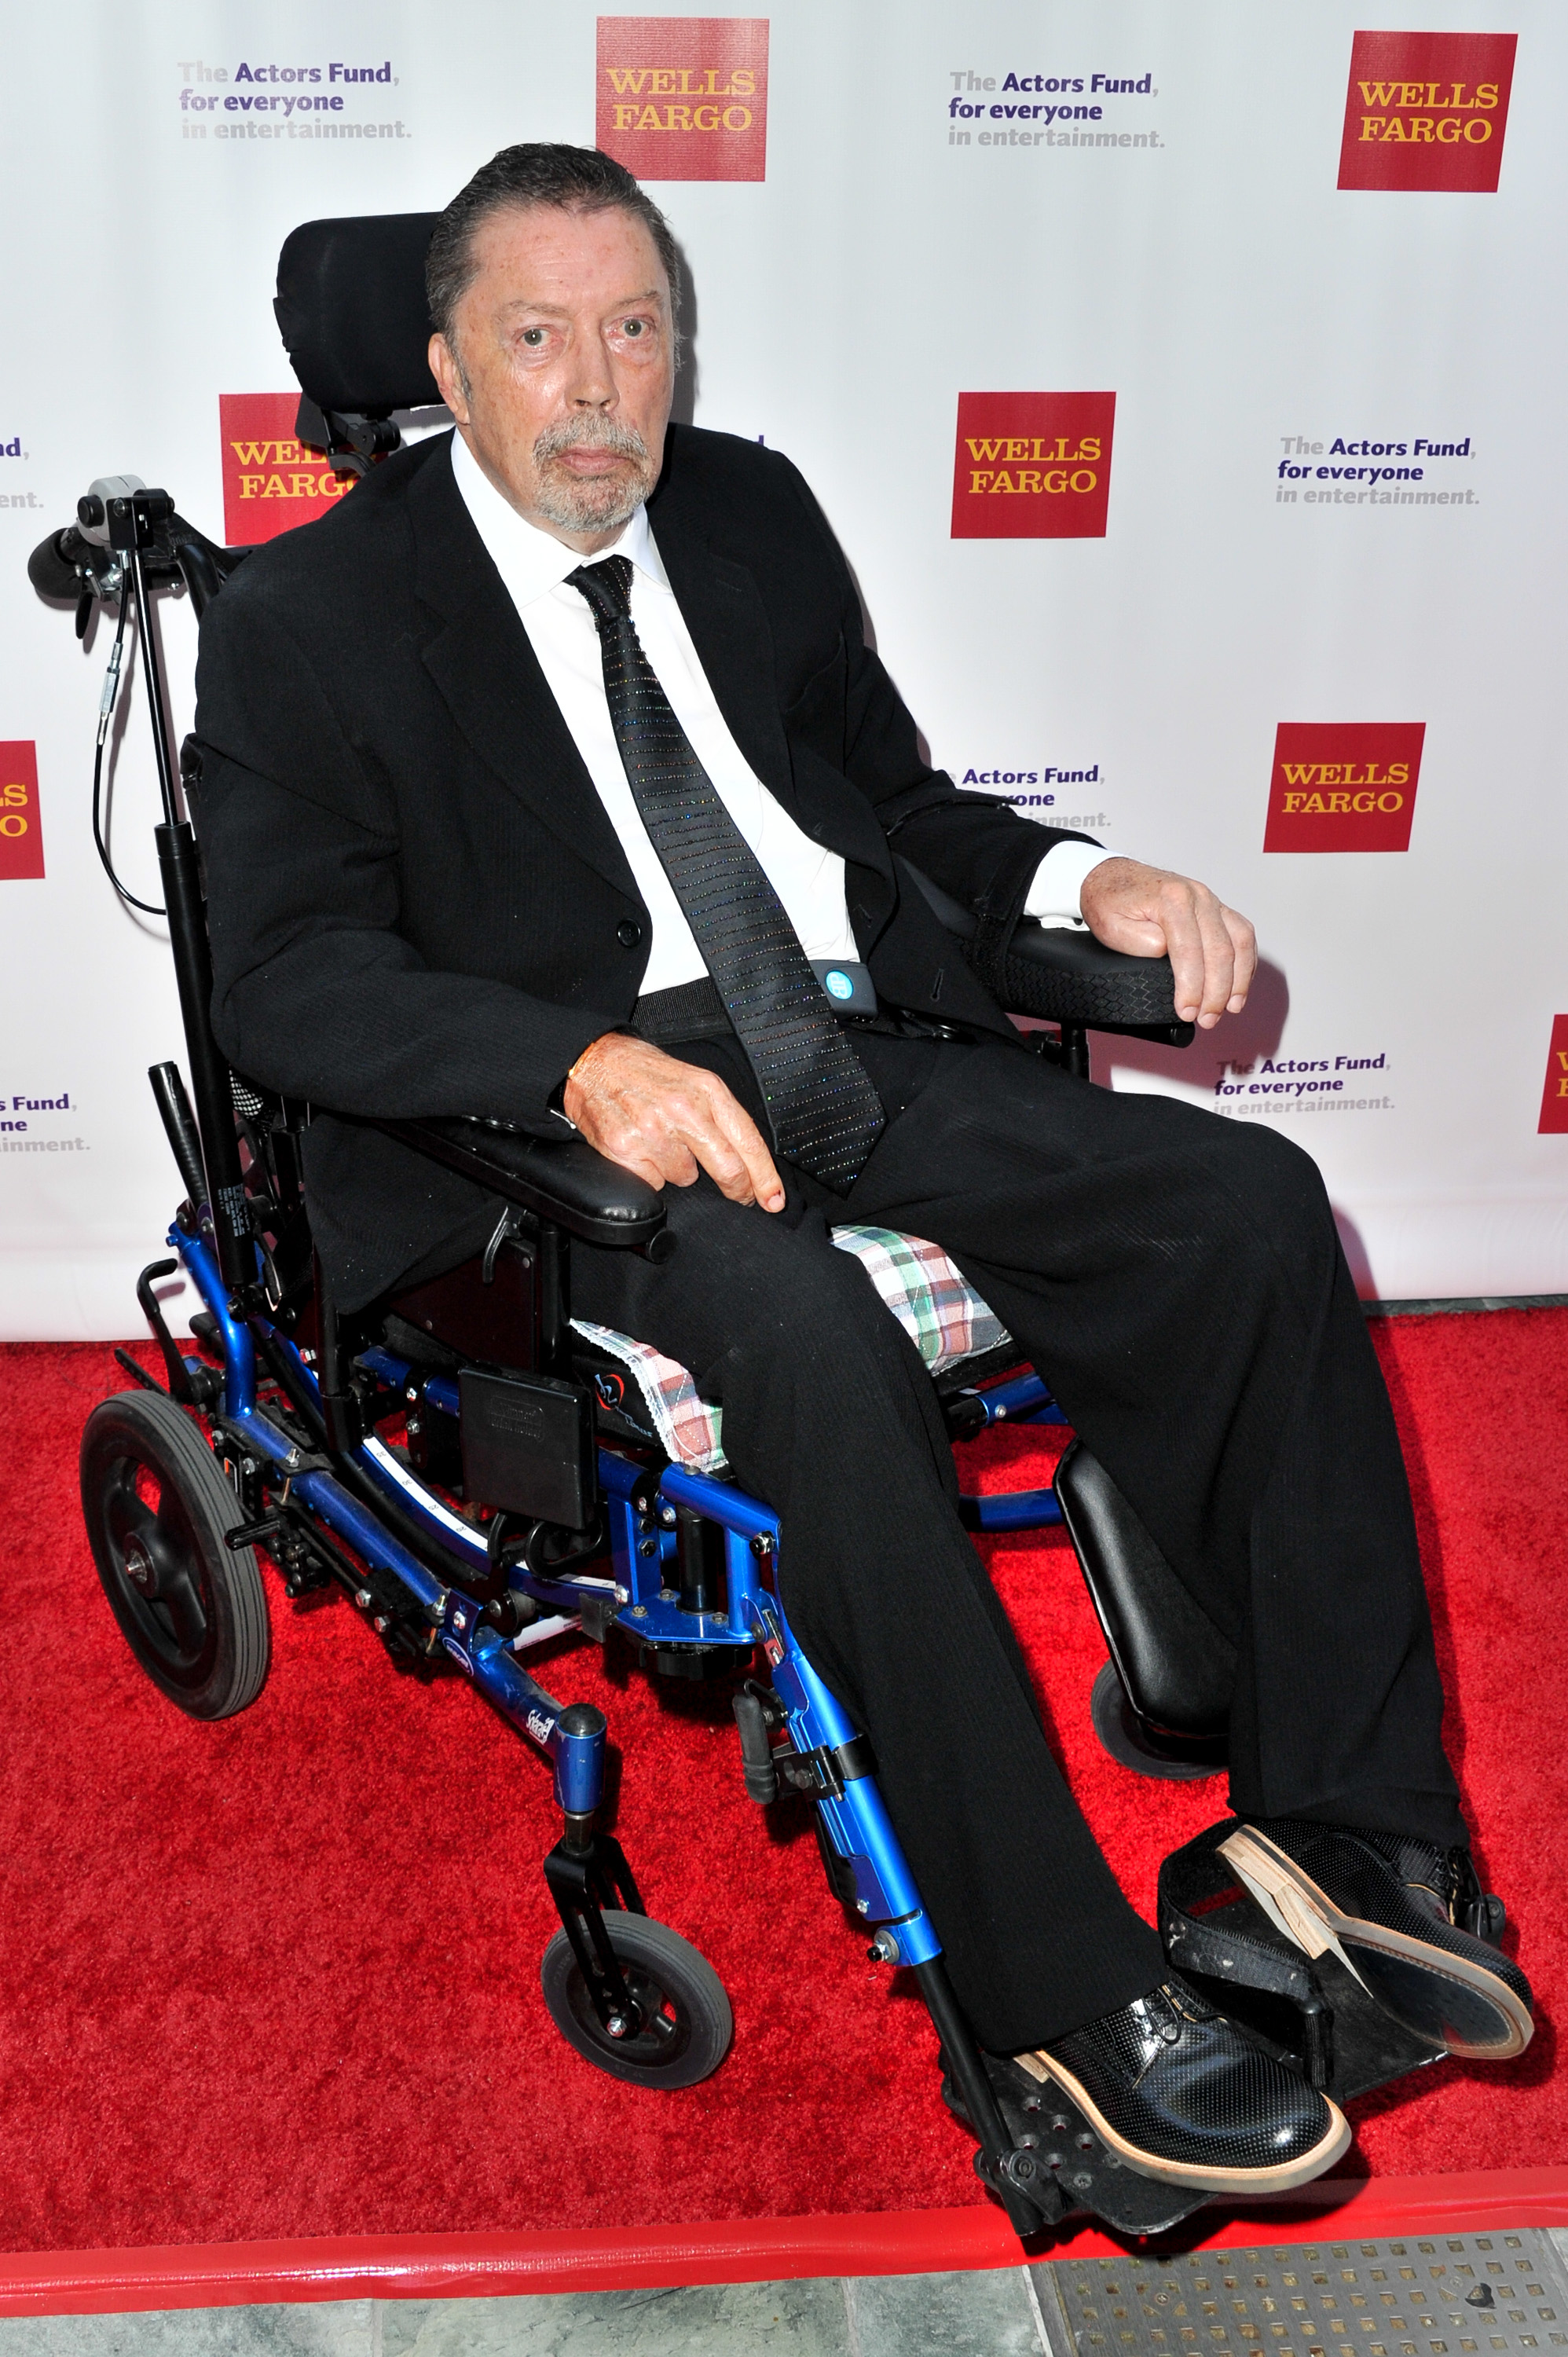 Tim Curry attends The Actors Fund's 19th Annual Tony Awards viewing party at Skirball Cultural Center on June 7, 2015 in Los Angeles, California. | Source: Getty Images